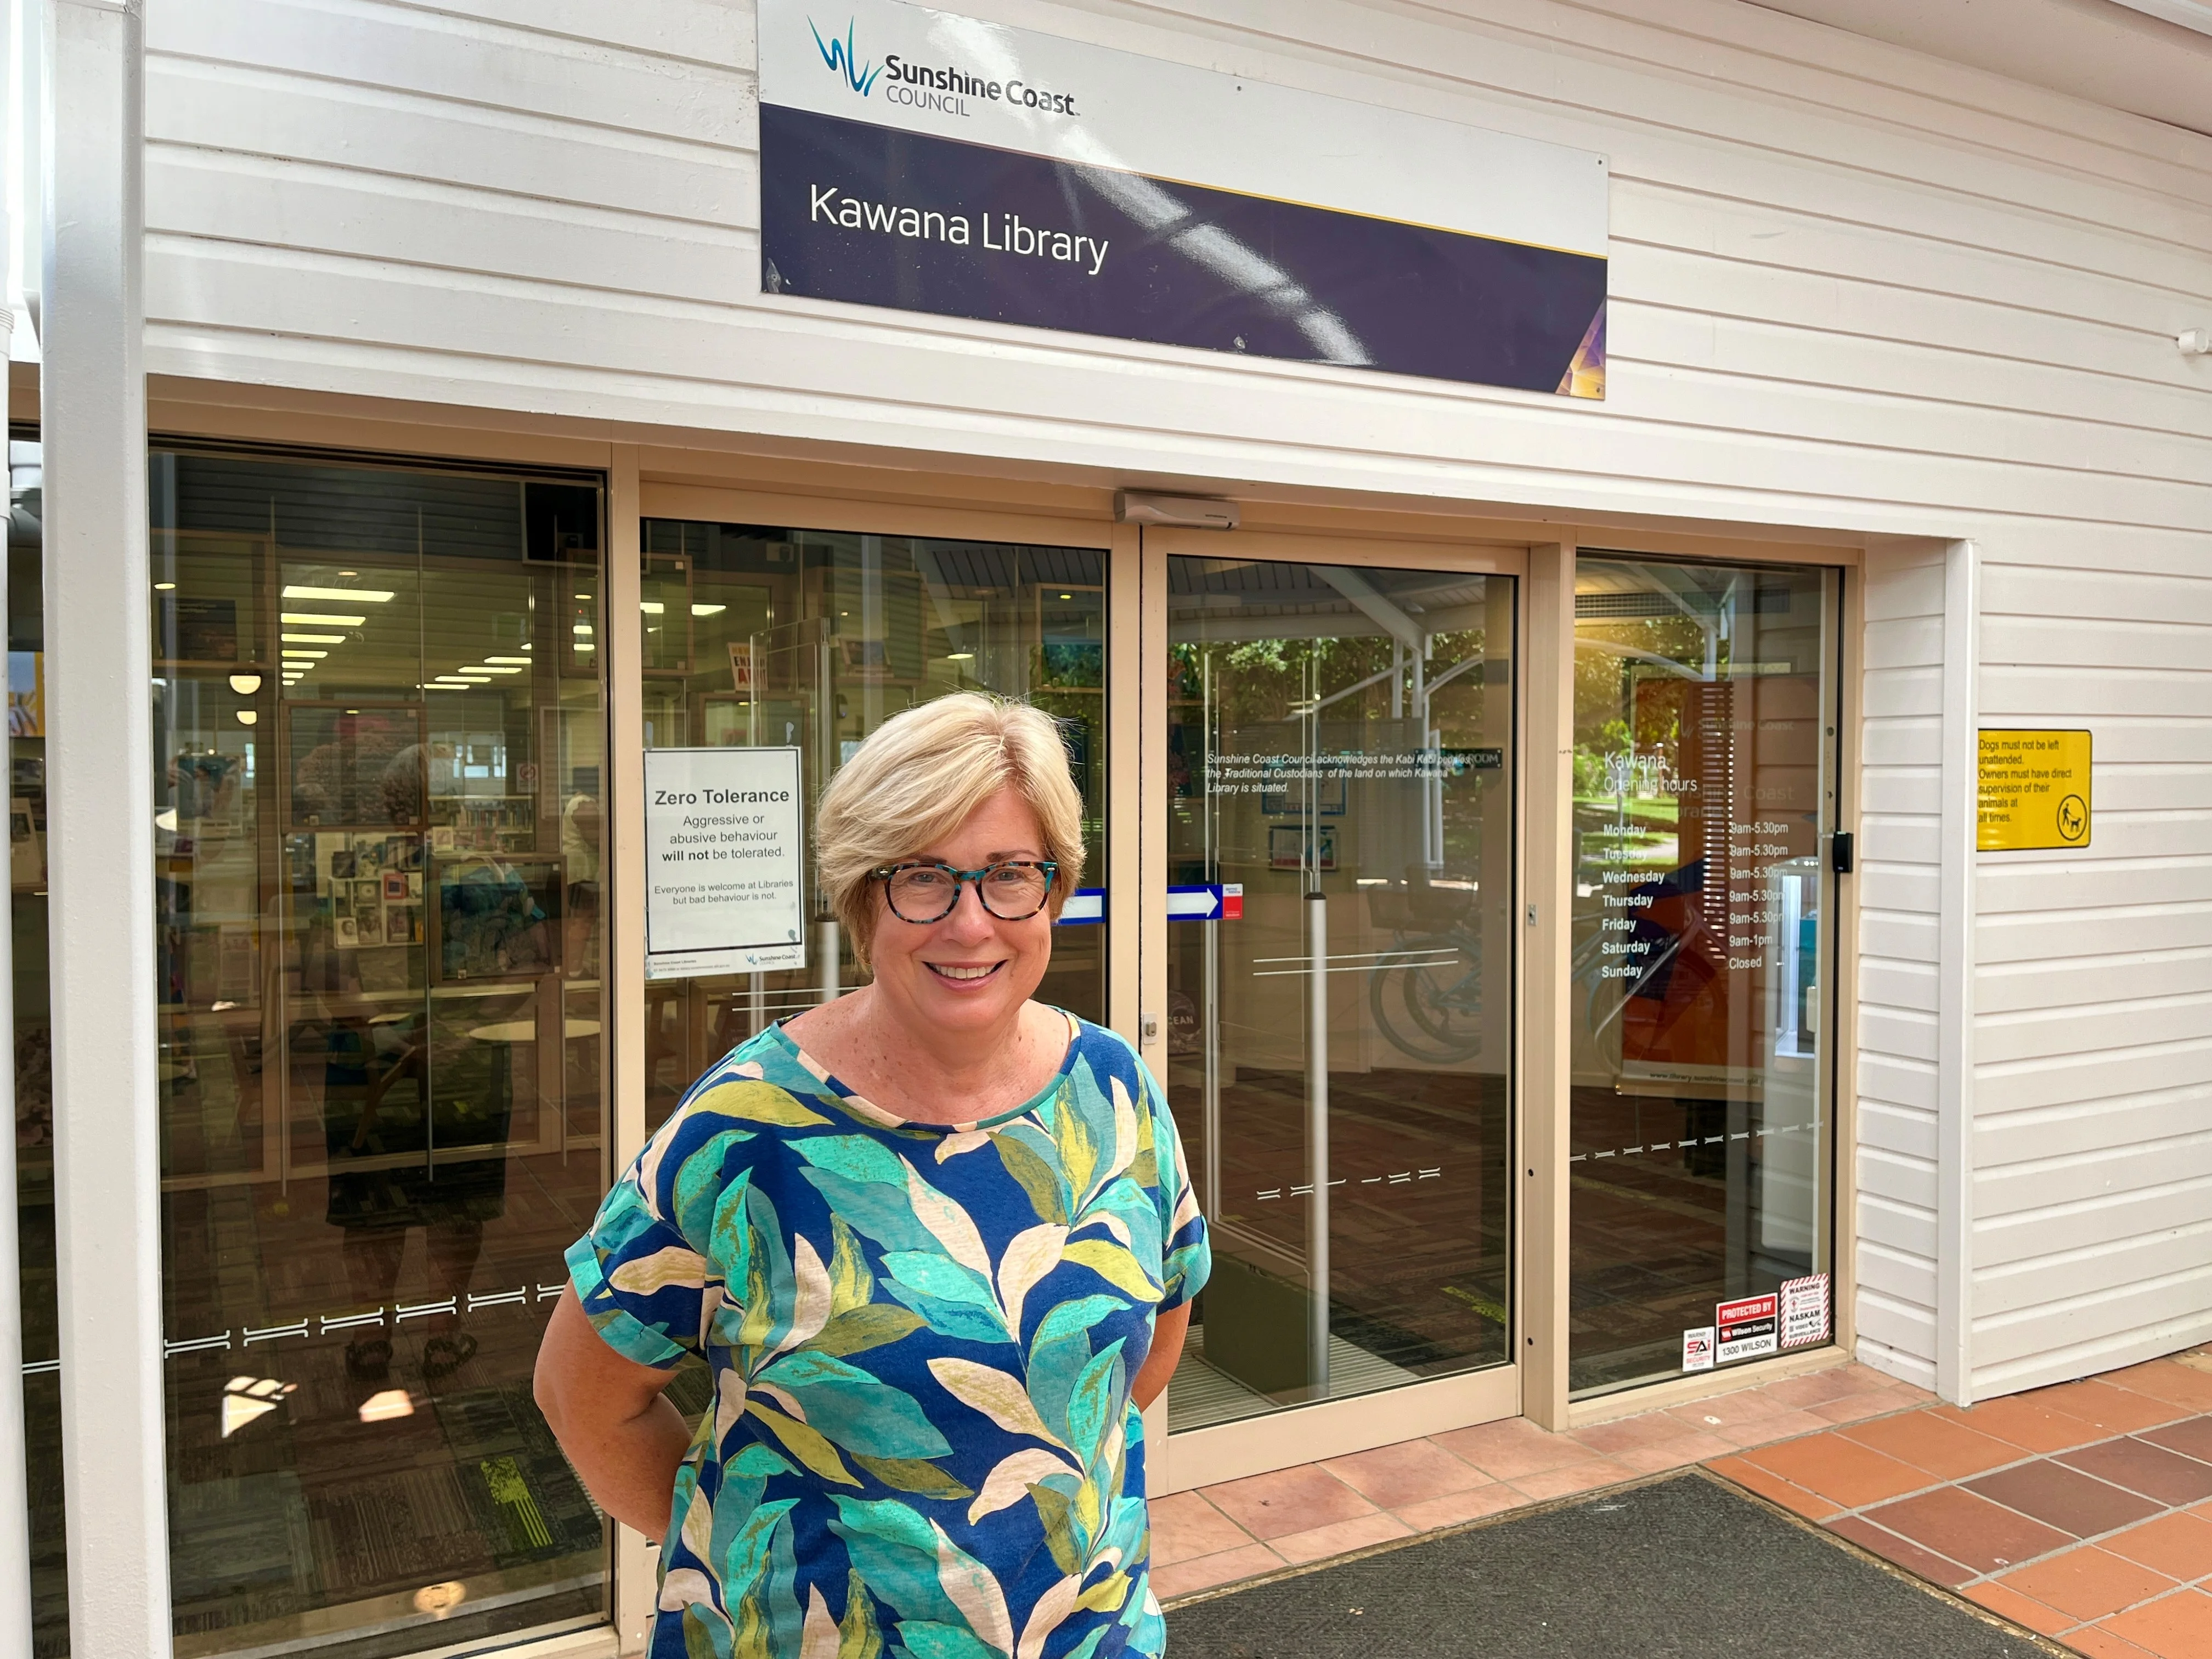 Volunteer Lyn Gavin standing outside the Kawana Library, hands folded behind her back, looking at the camera smiling. 